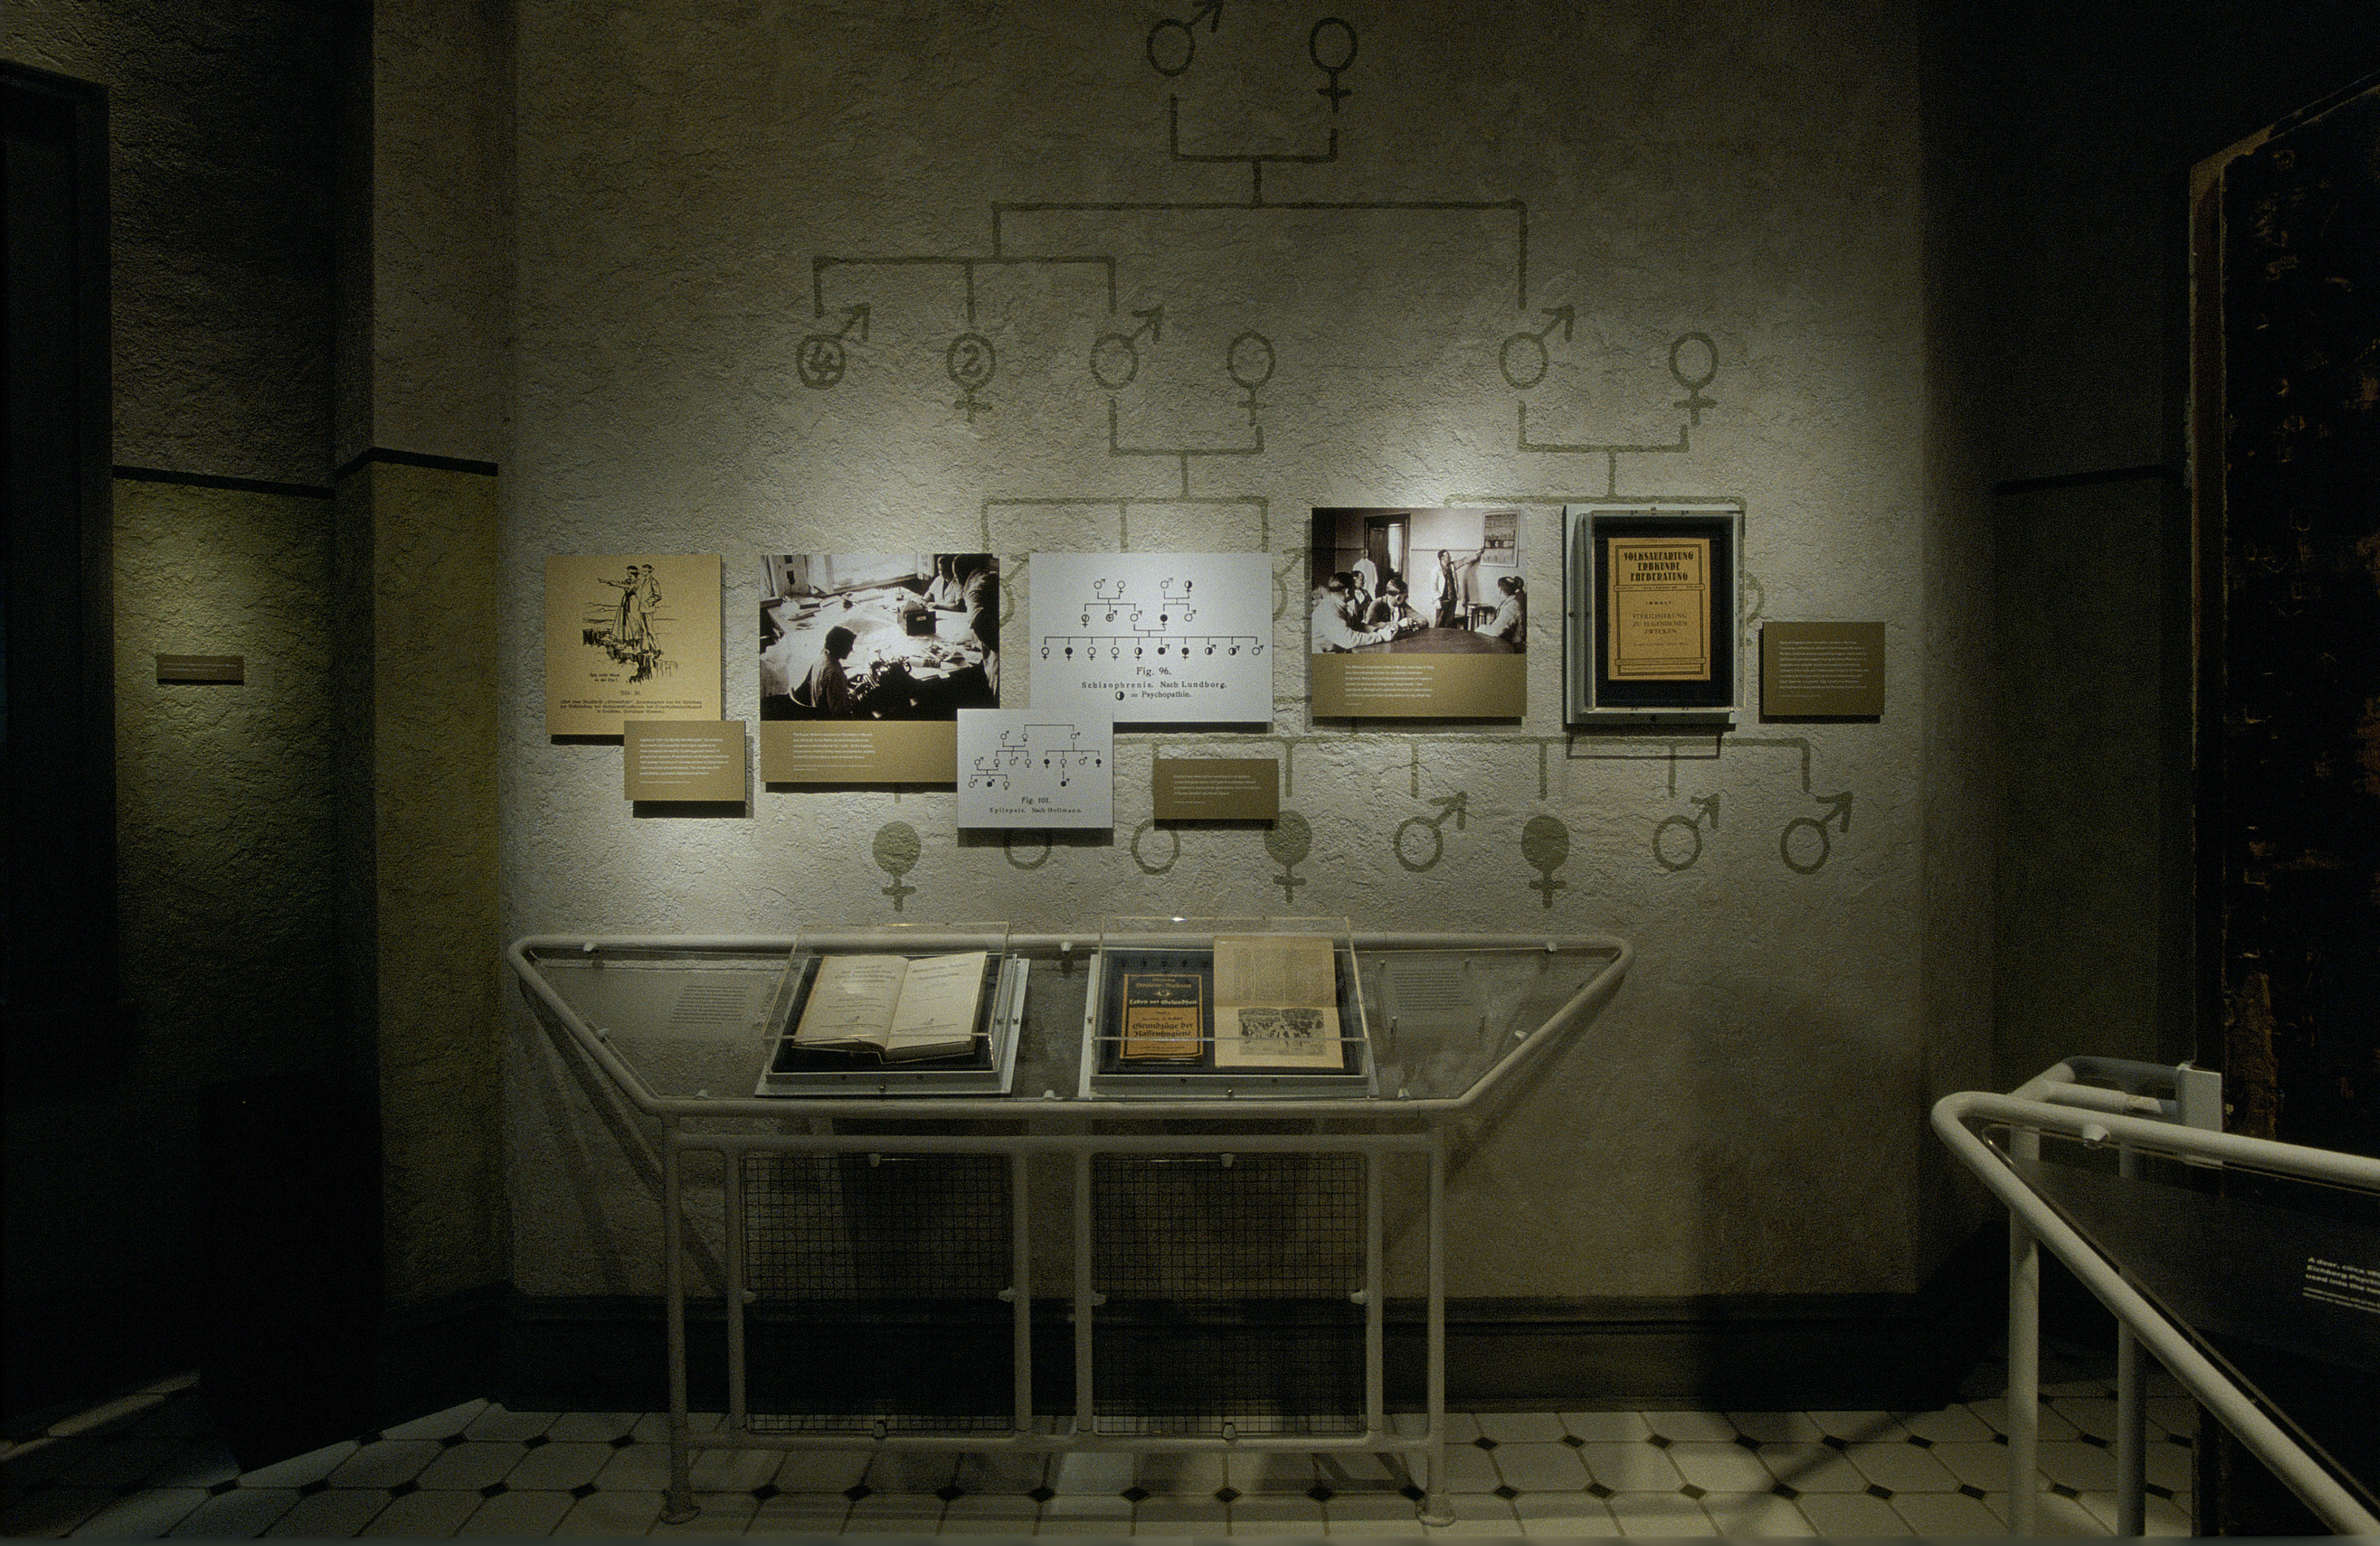 One segment from the special exhibition, "Deadly Medicine: Creating the Master Race," U.S. Holocaust Memorial Museum, which opened on April 22, 2004.